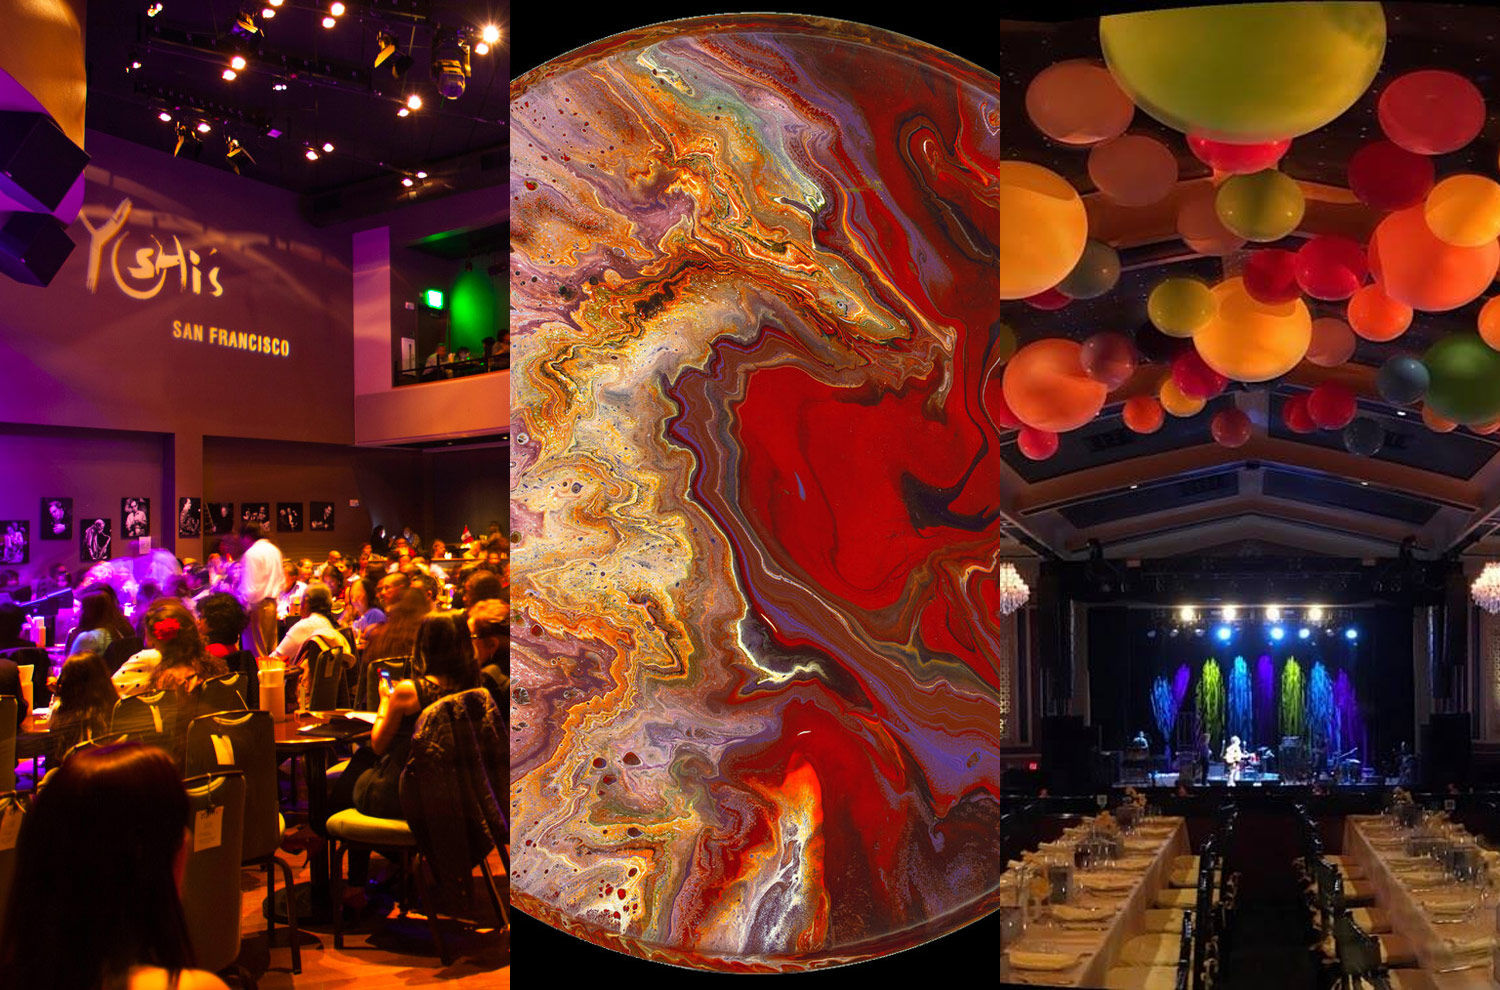 Image of Collage showing Yoshi's, Mickey Hart's art, and the UC Theatre